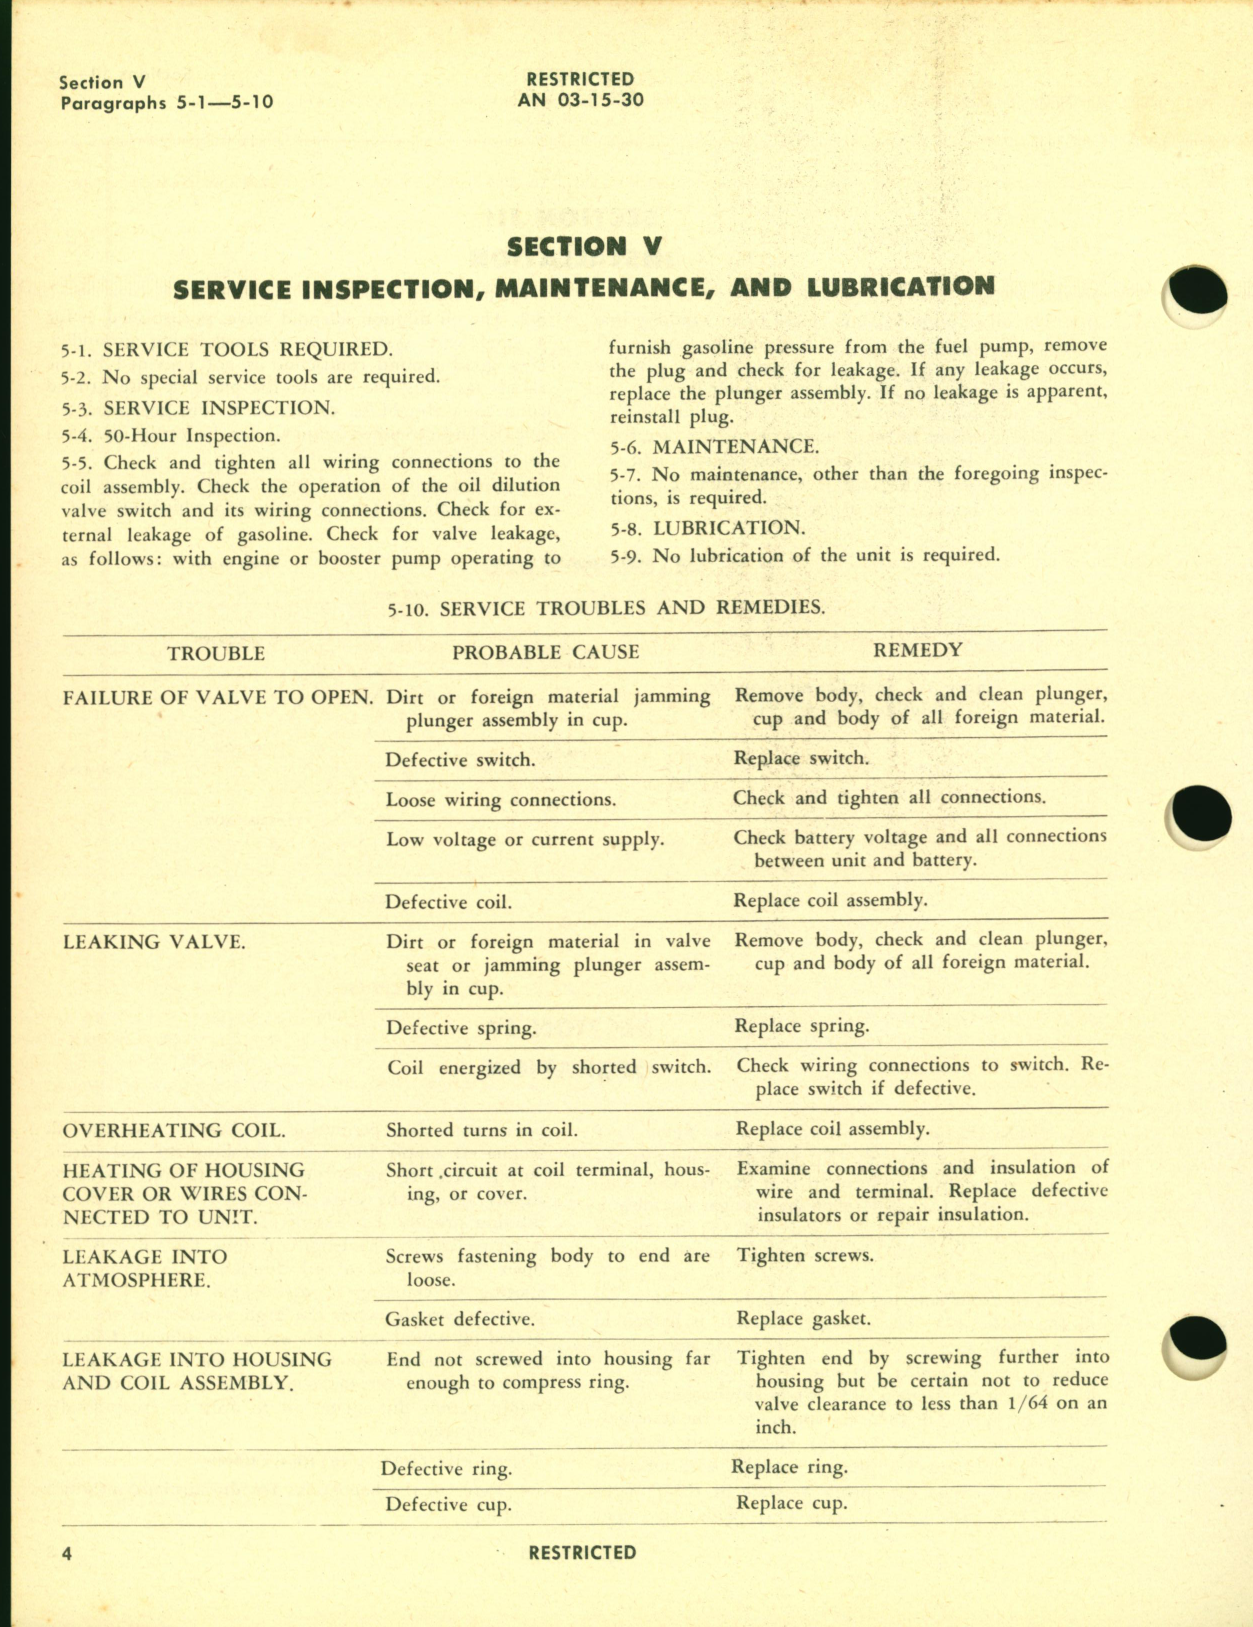 Sample page 6 from AirCorps Library document: Operation and Service Instructions for Oil Dilution Solenoid Valve Type AN4078